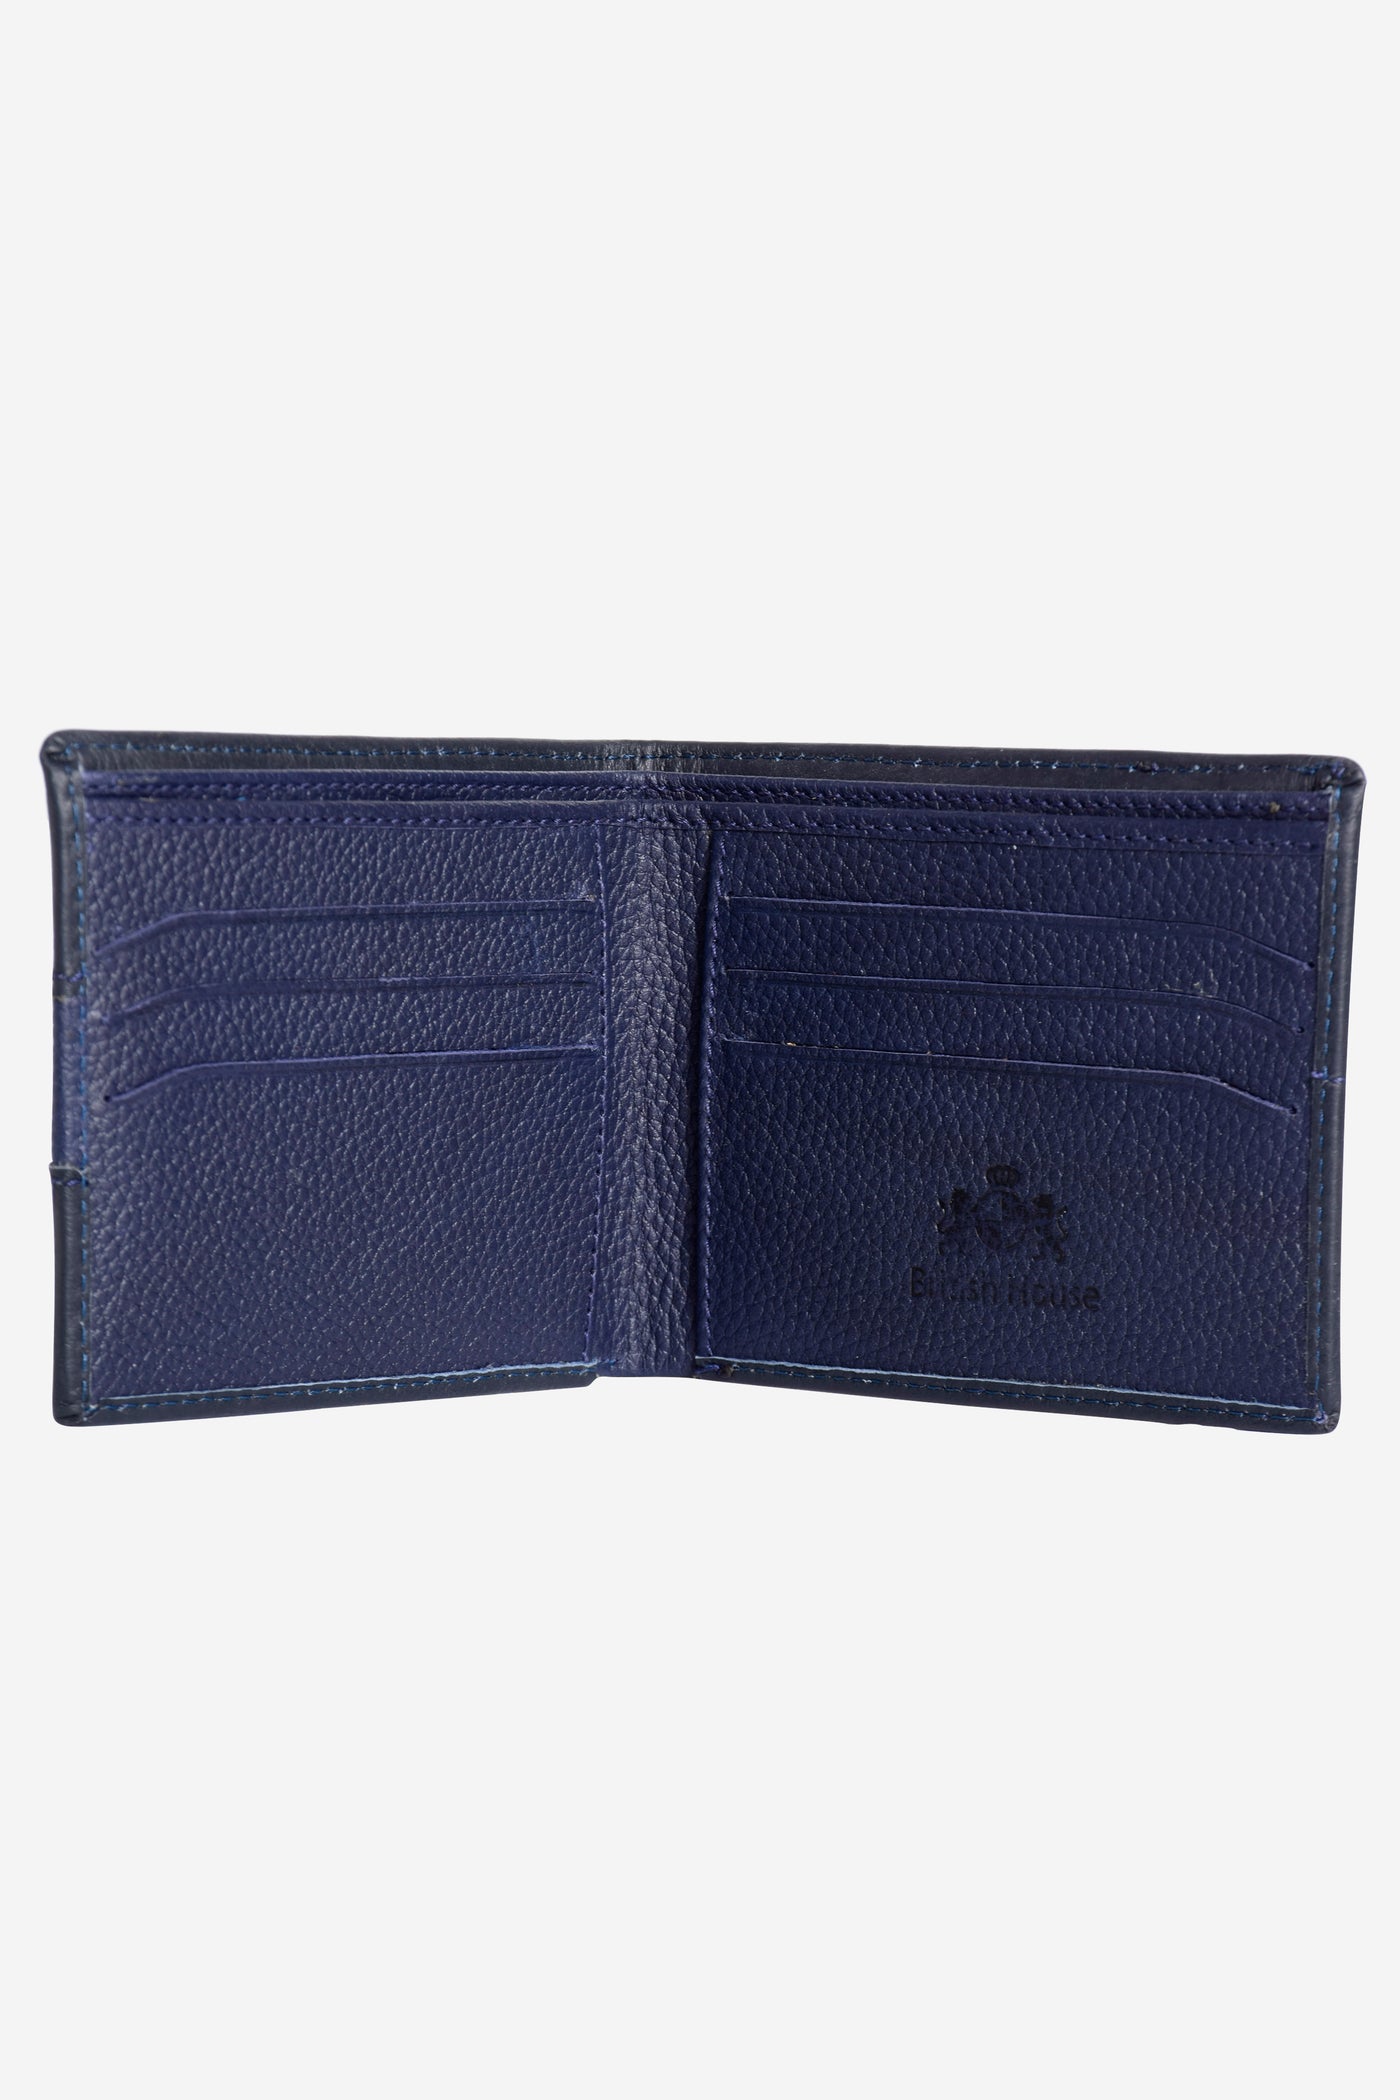 WAL011 / Midnight Blue Leather Wallet